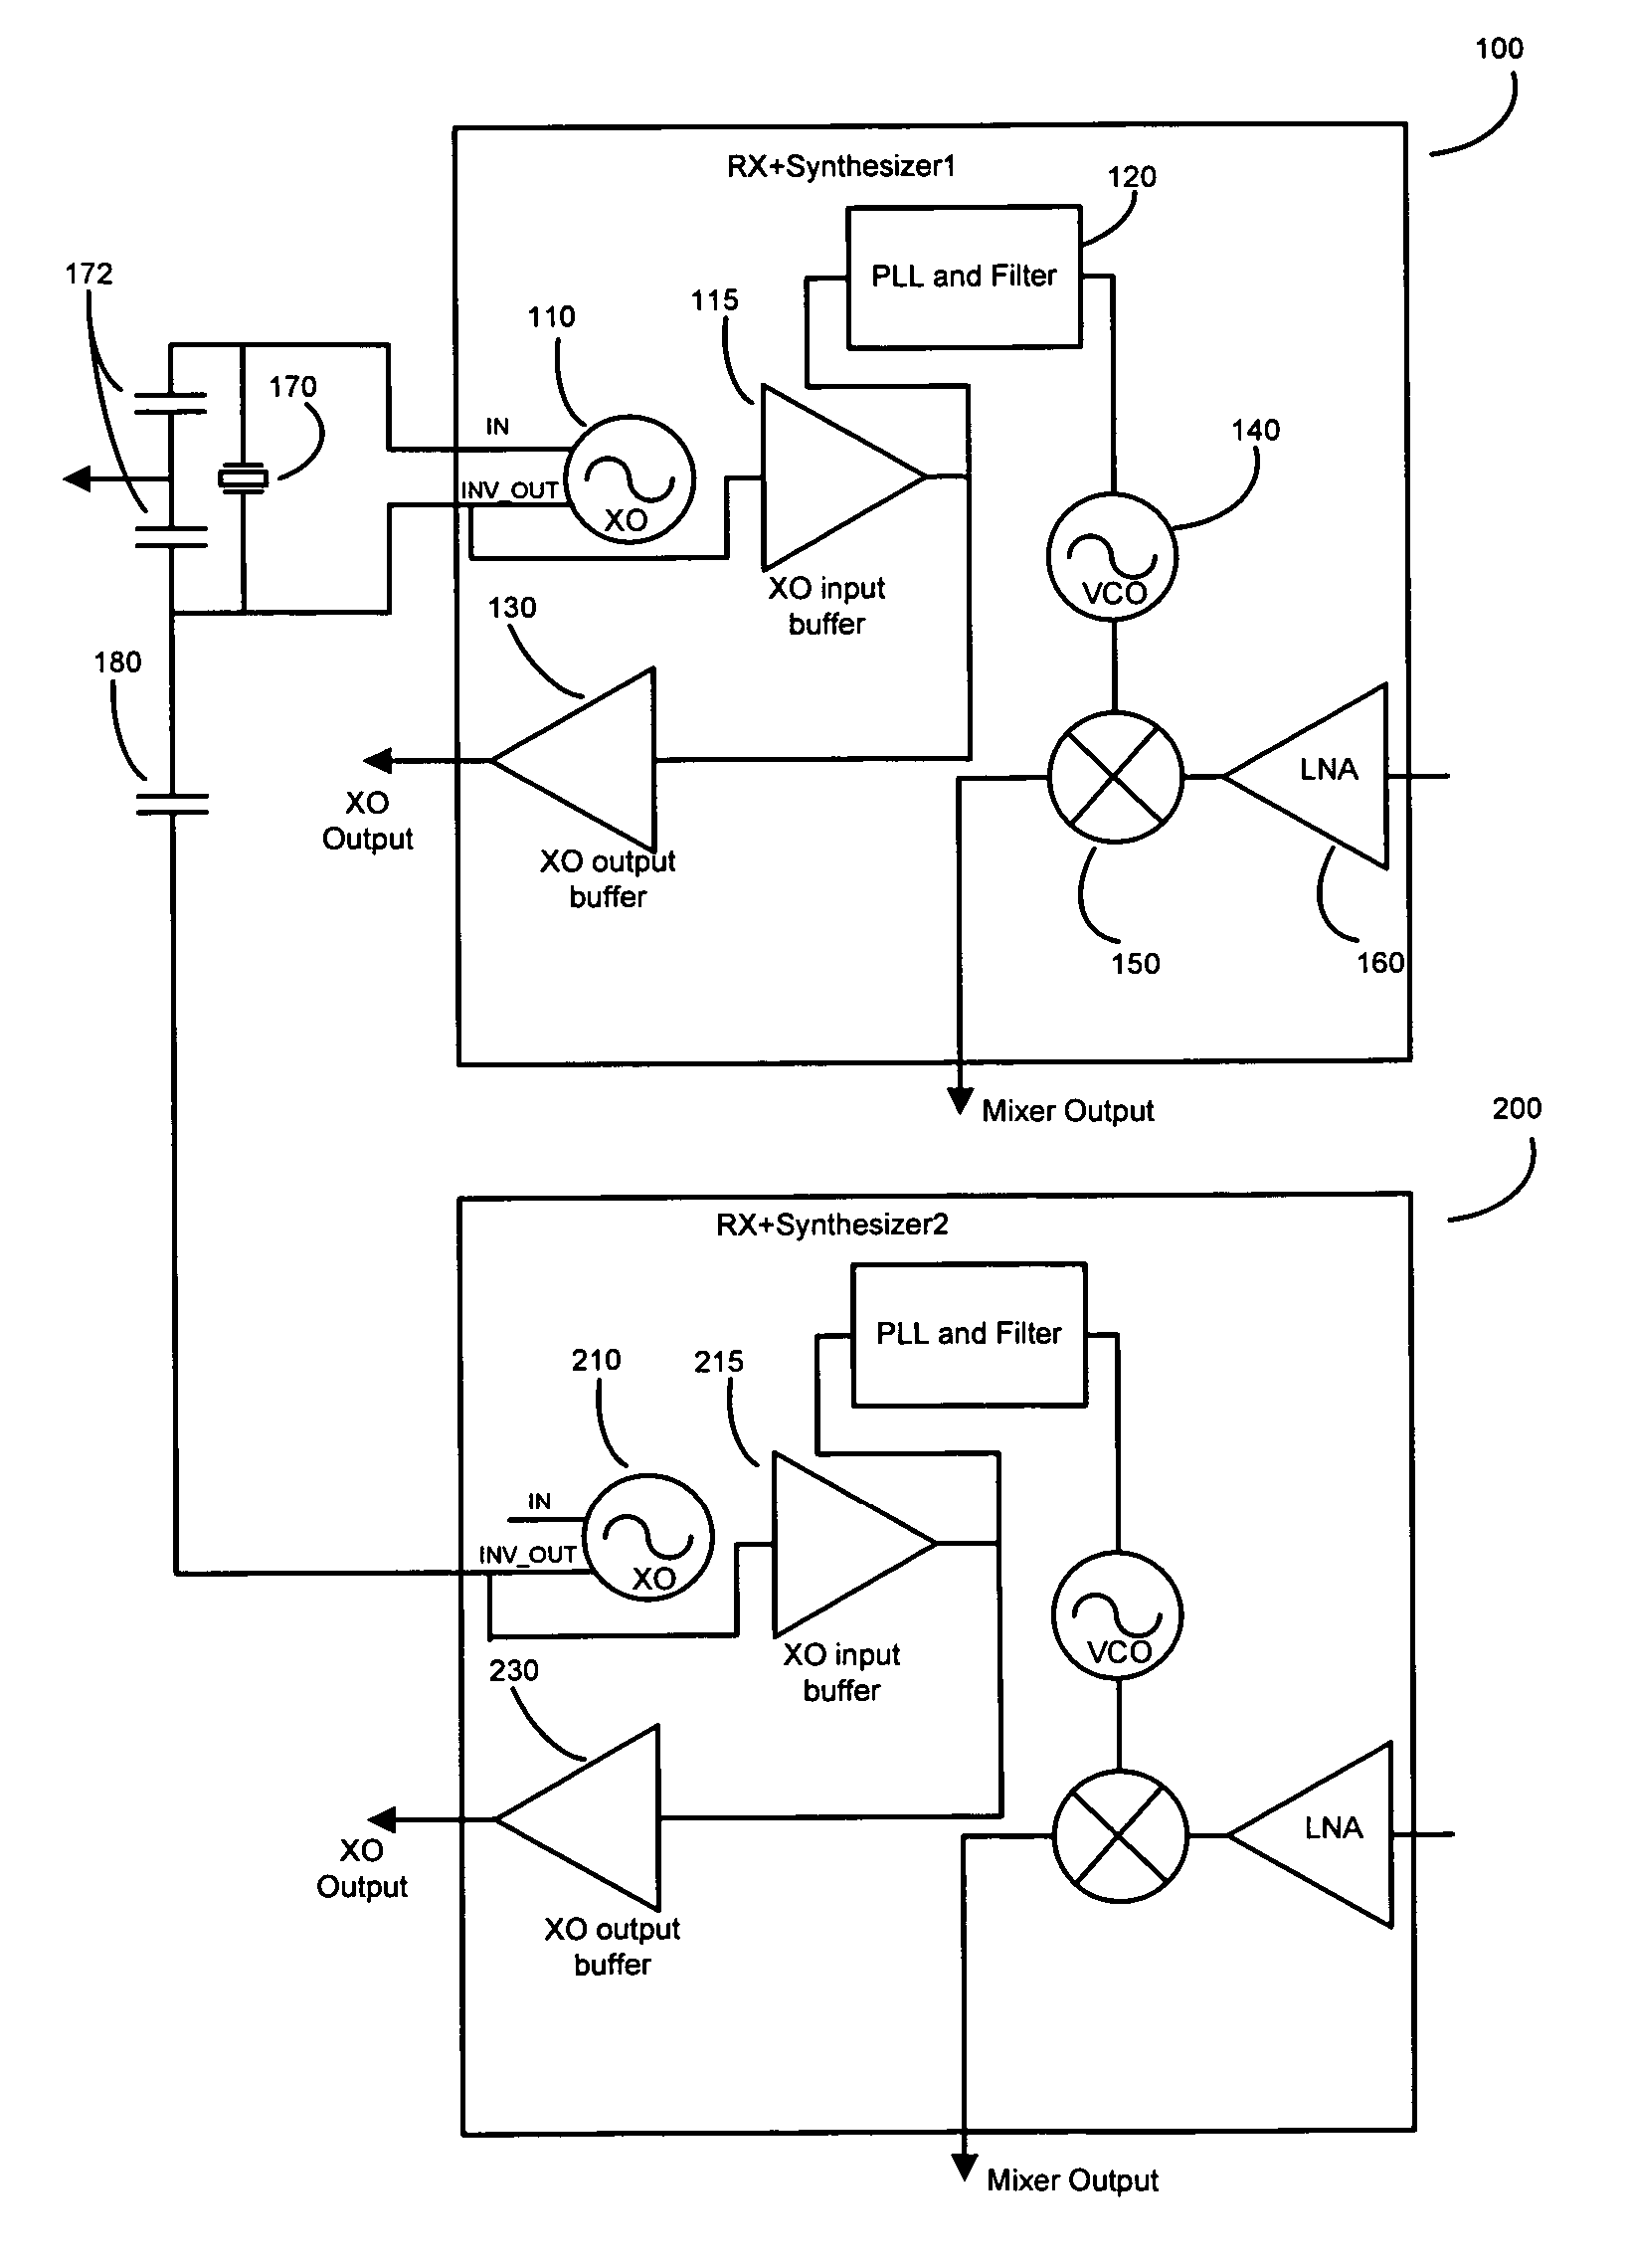 Oscillator coupling to reduce spurious signals in receiver circuits